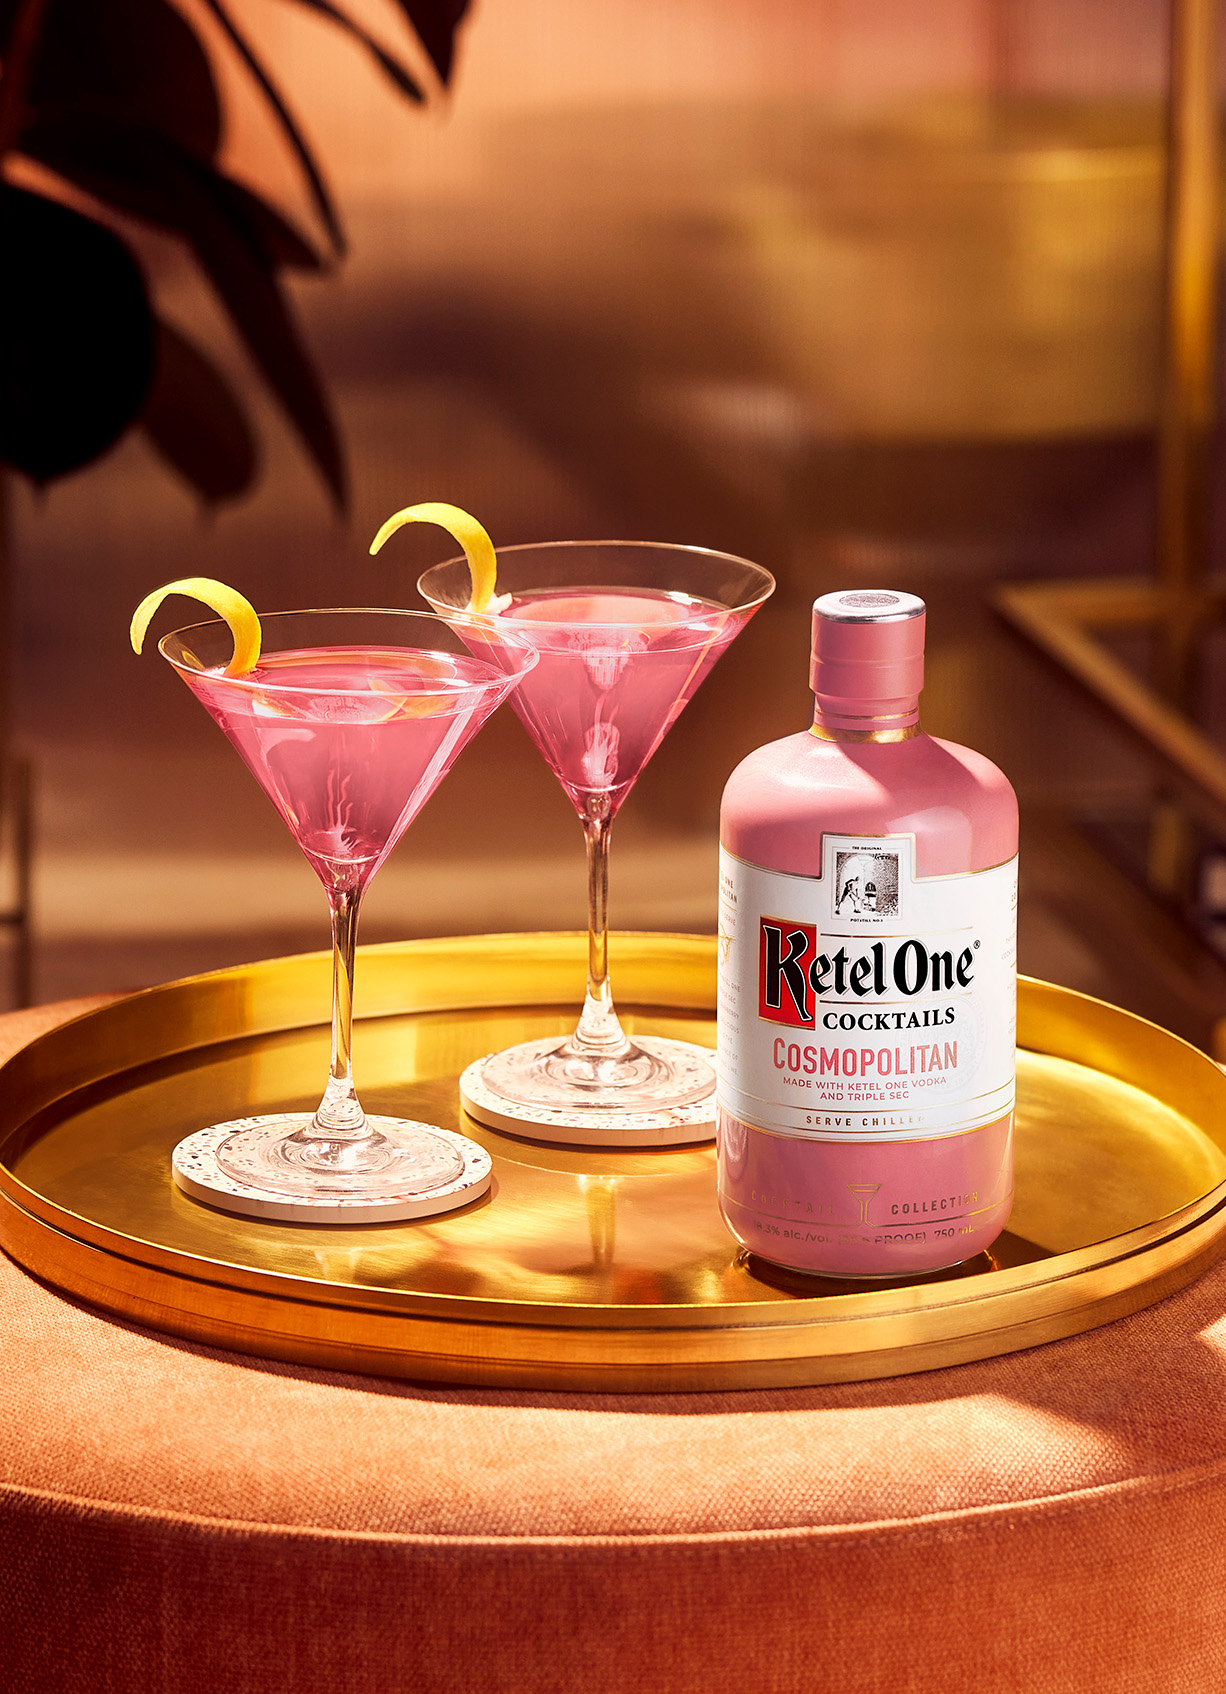 Ketel One Vodka Cosmopolitan from The Cocktail Collection